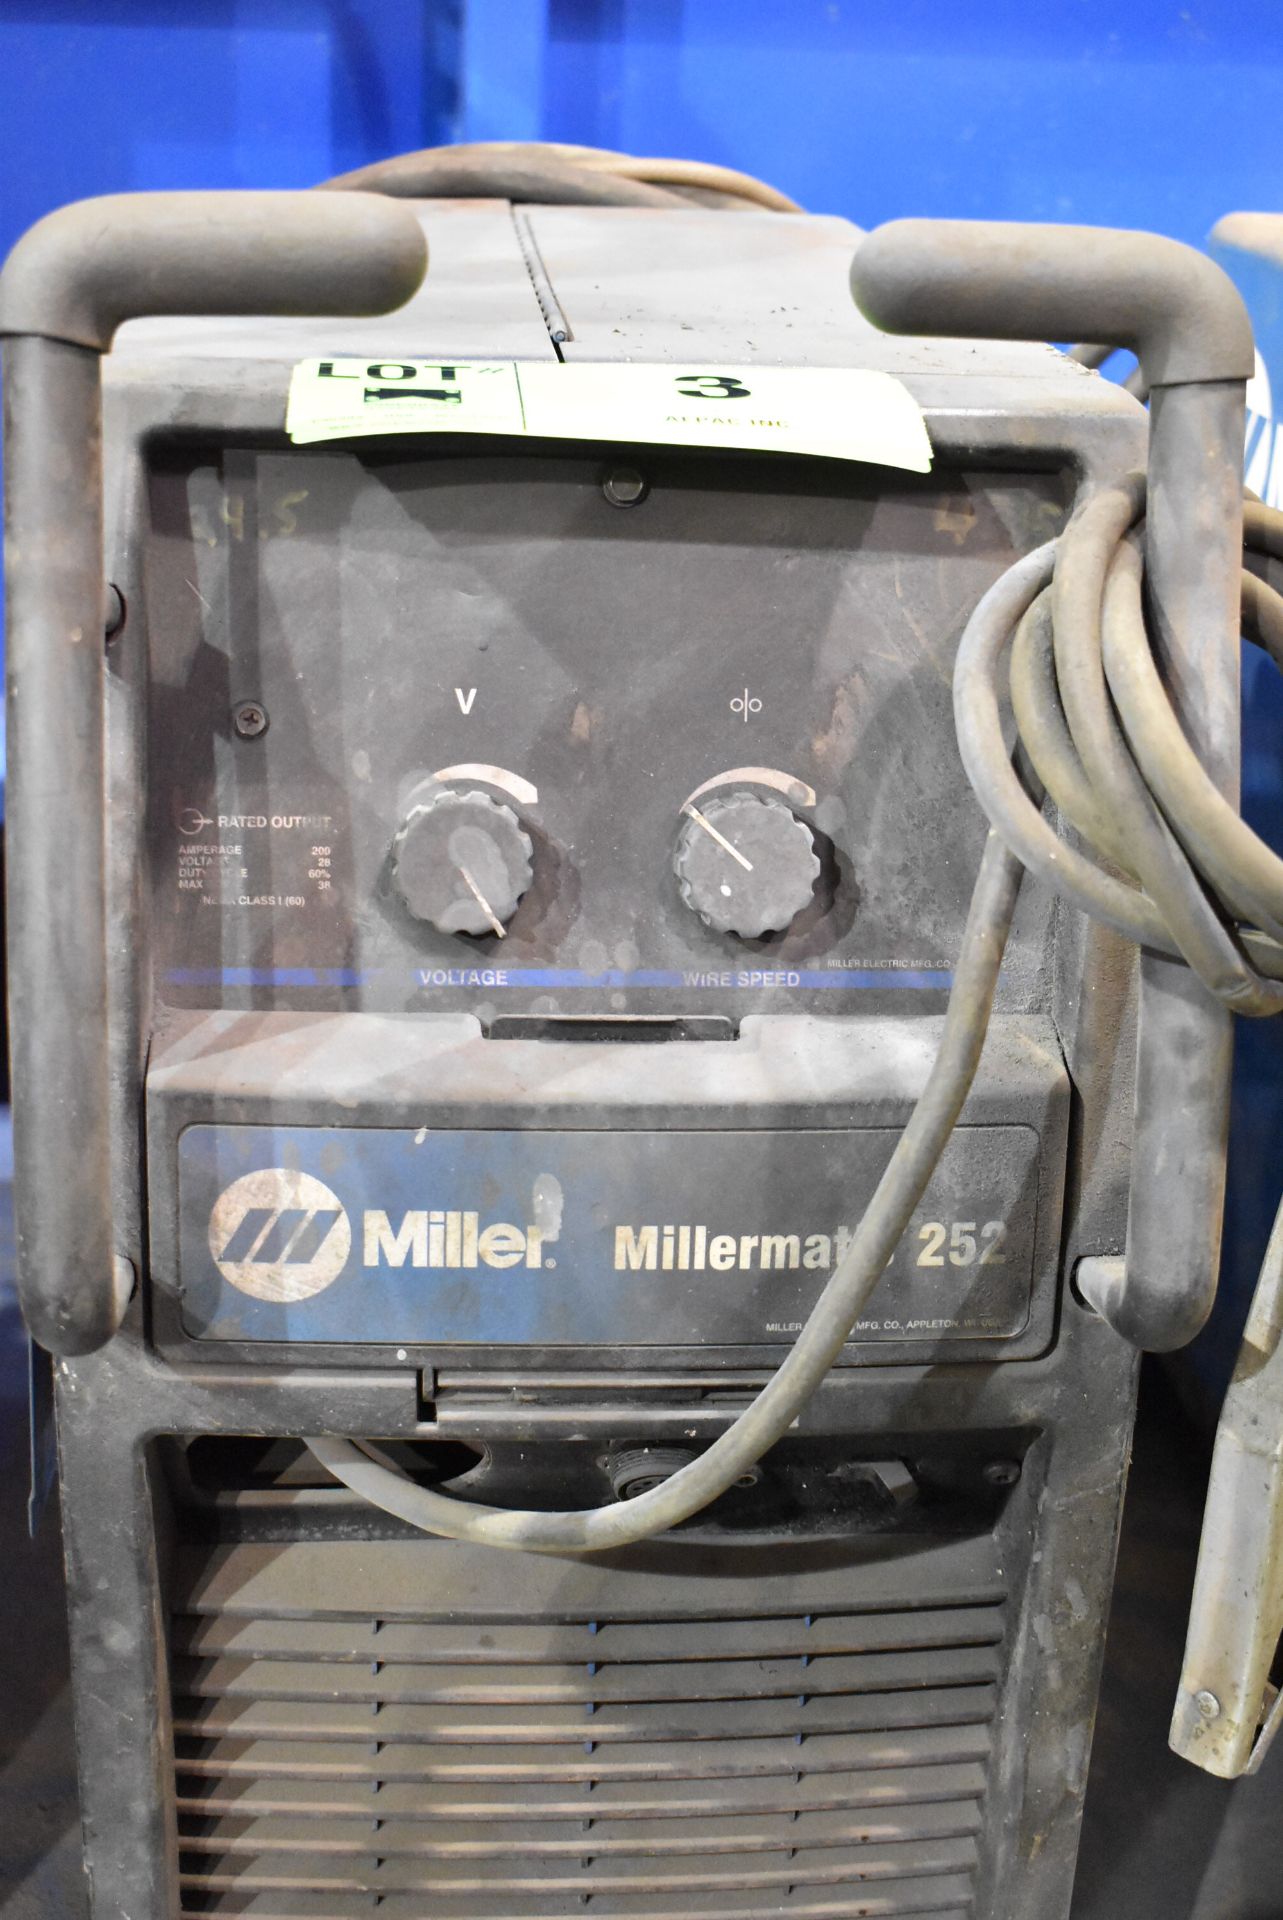 MILLER MILLERMATIC 252 MIG WELDER WITH CABLES AND GUN, S/N MJ200512N - Image 2 of 5